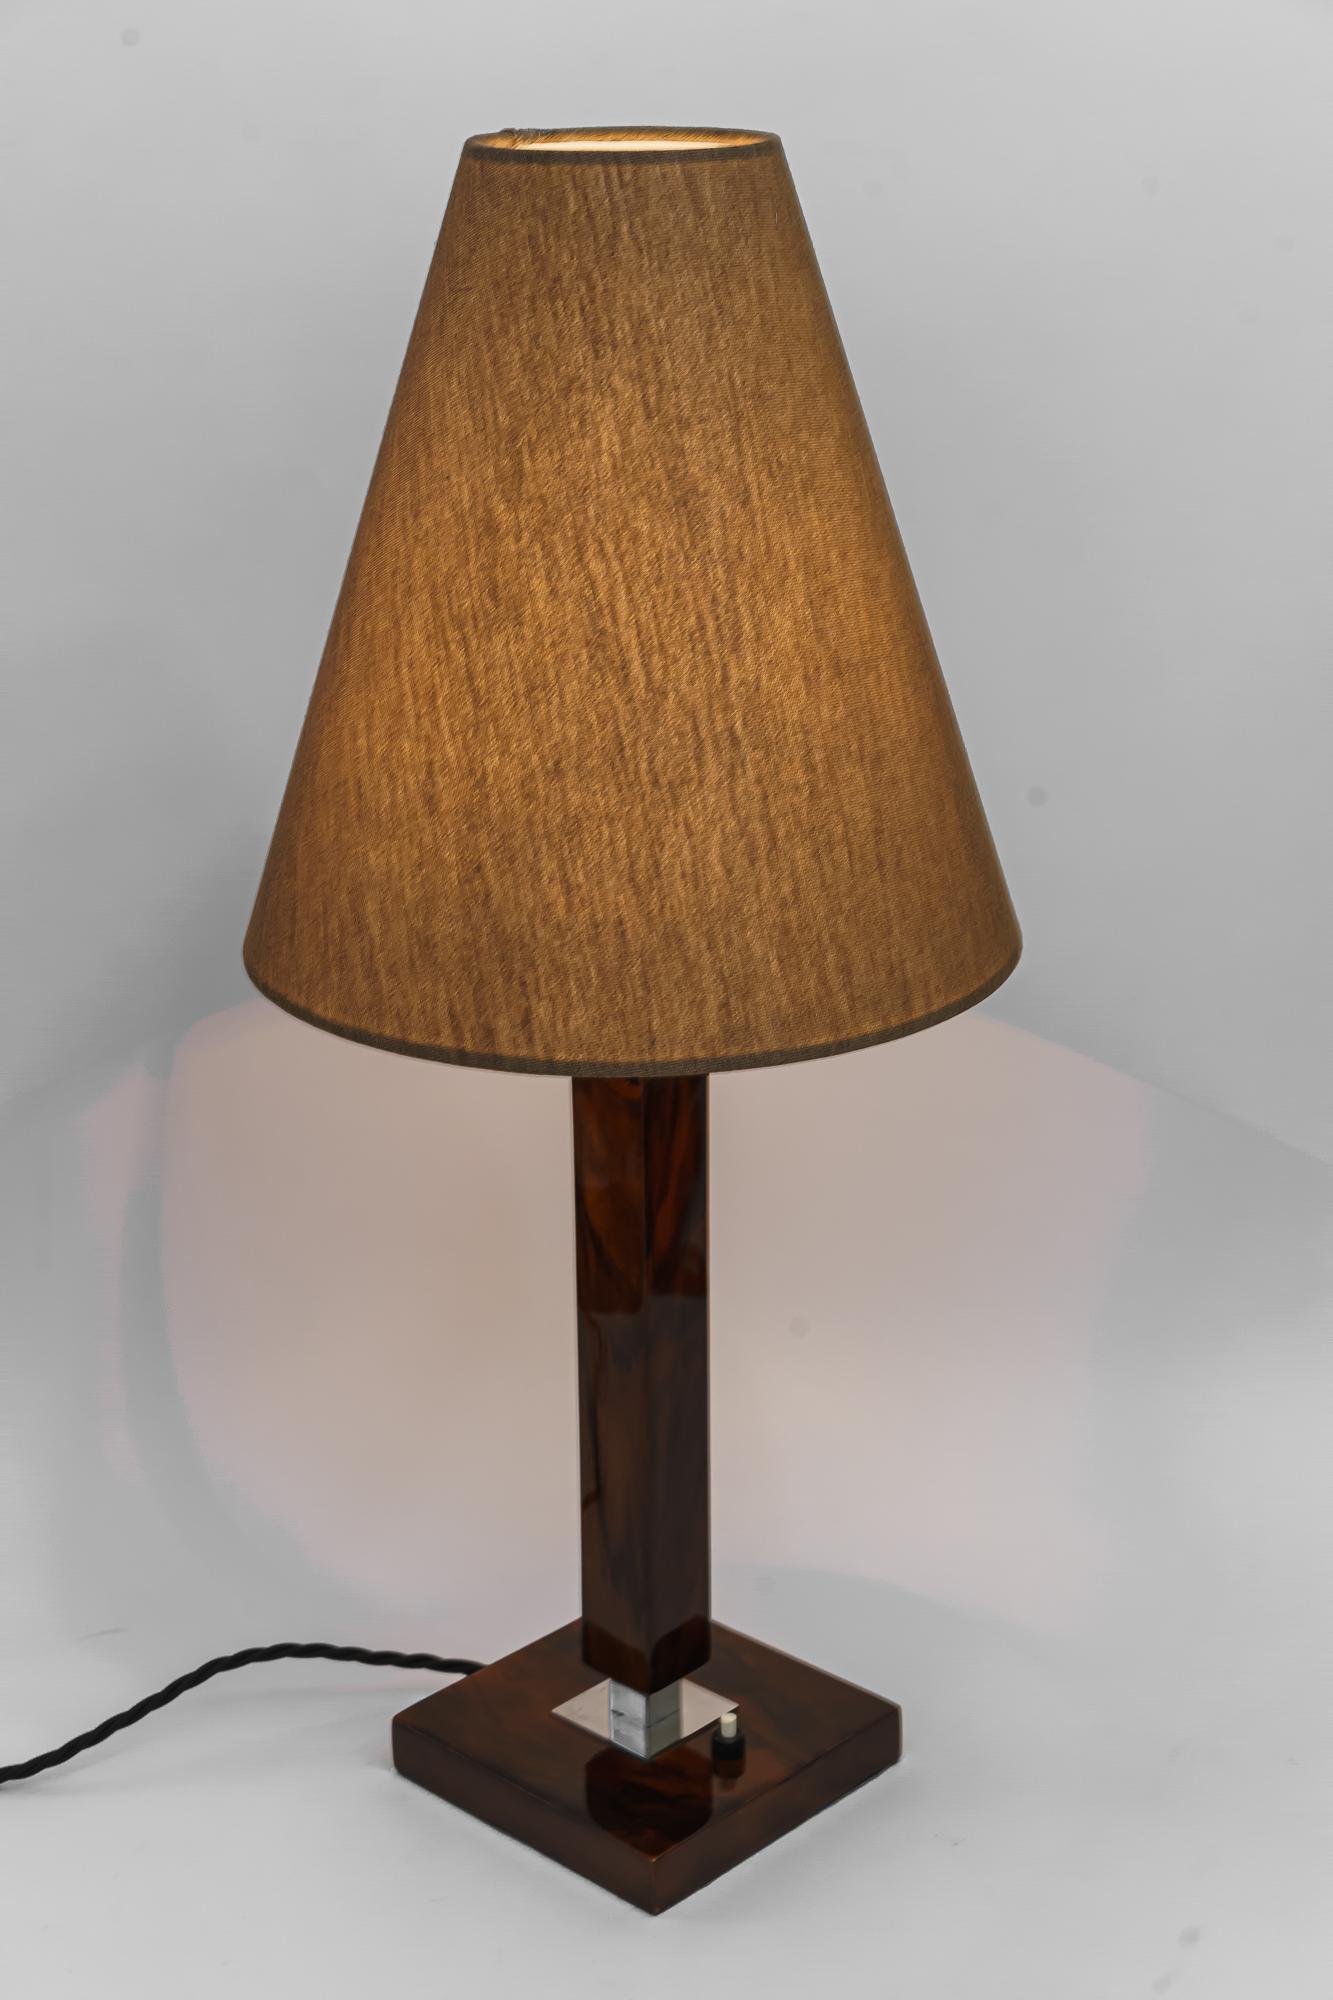 Early 20th Century Art Deco Table Lamp Vienna Around 1920 Nut Wood and Fabric Shade For Sale